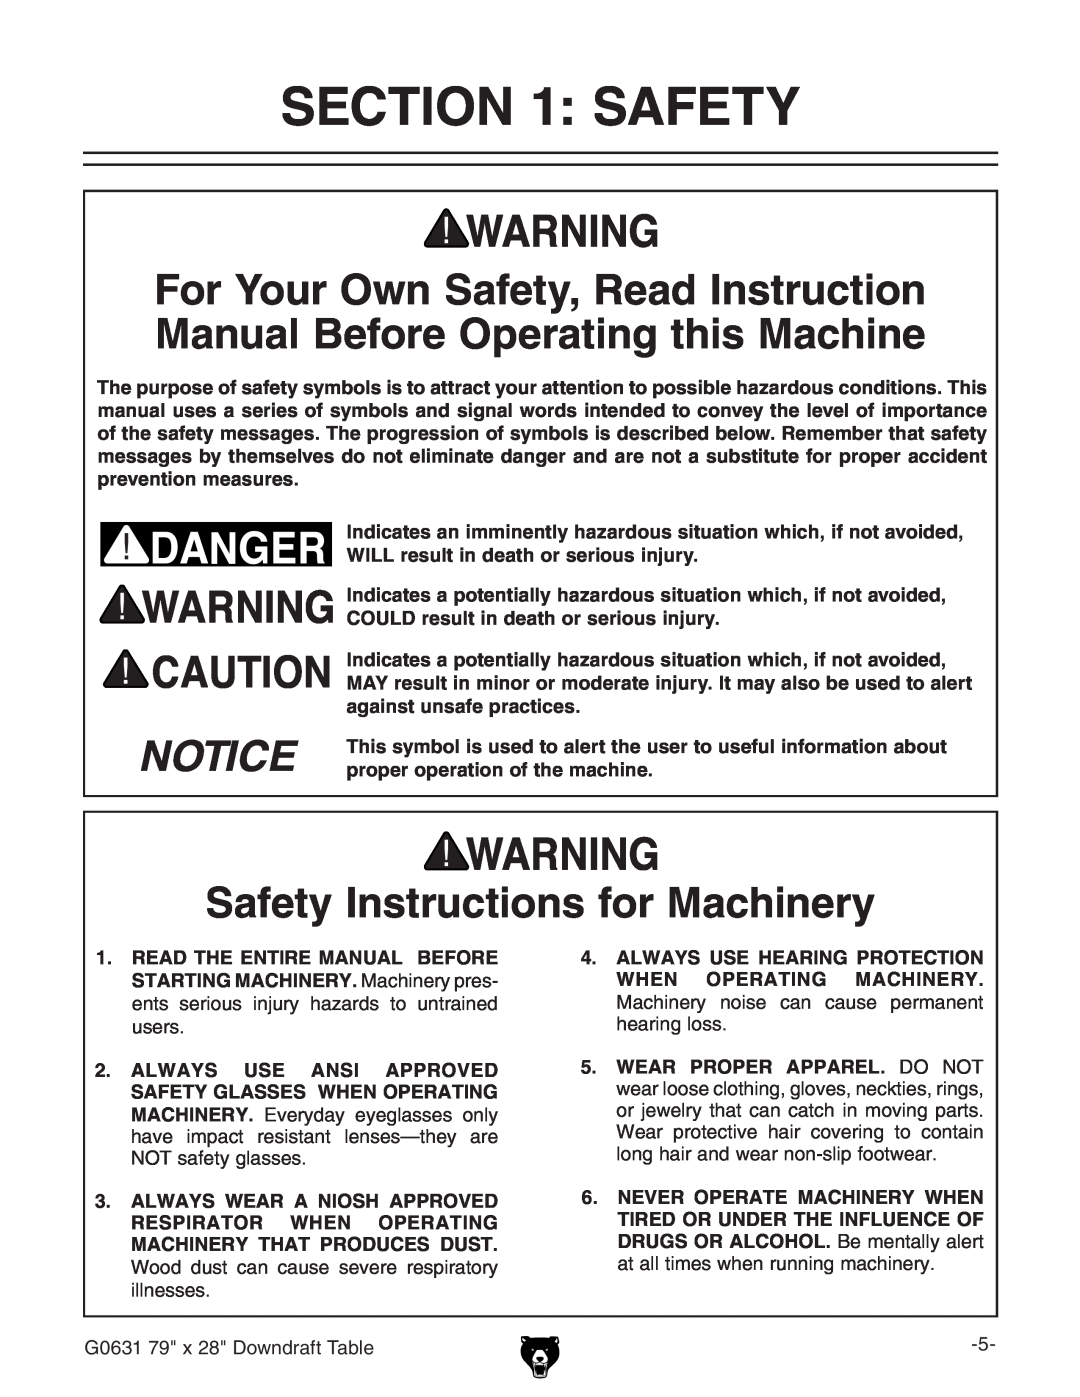 Grizzly owner manual Safety Instructions for Machinery, G0631 79 x 28 Downdraft Table 